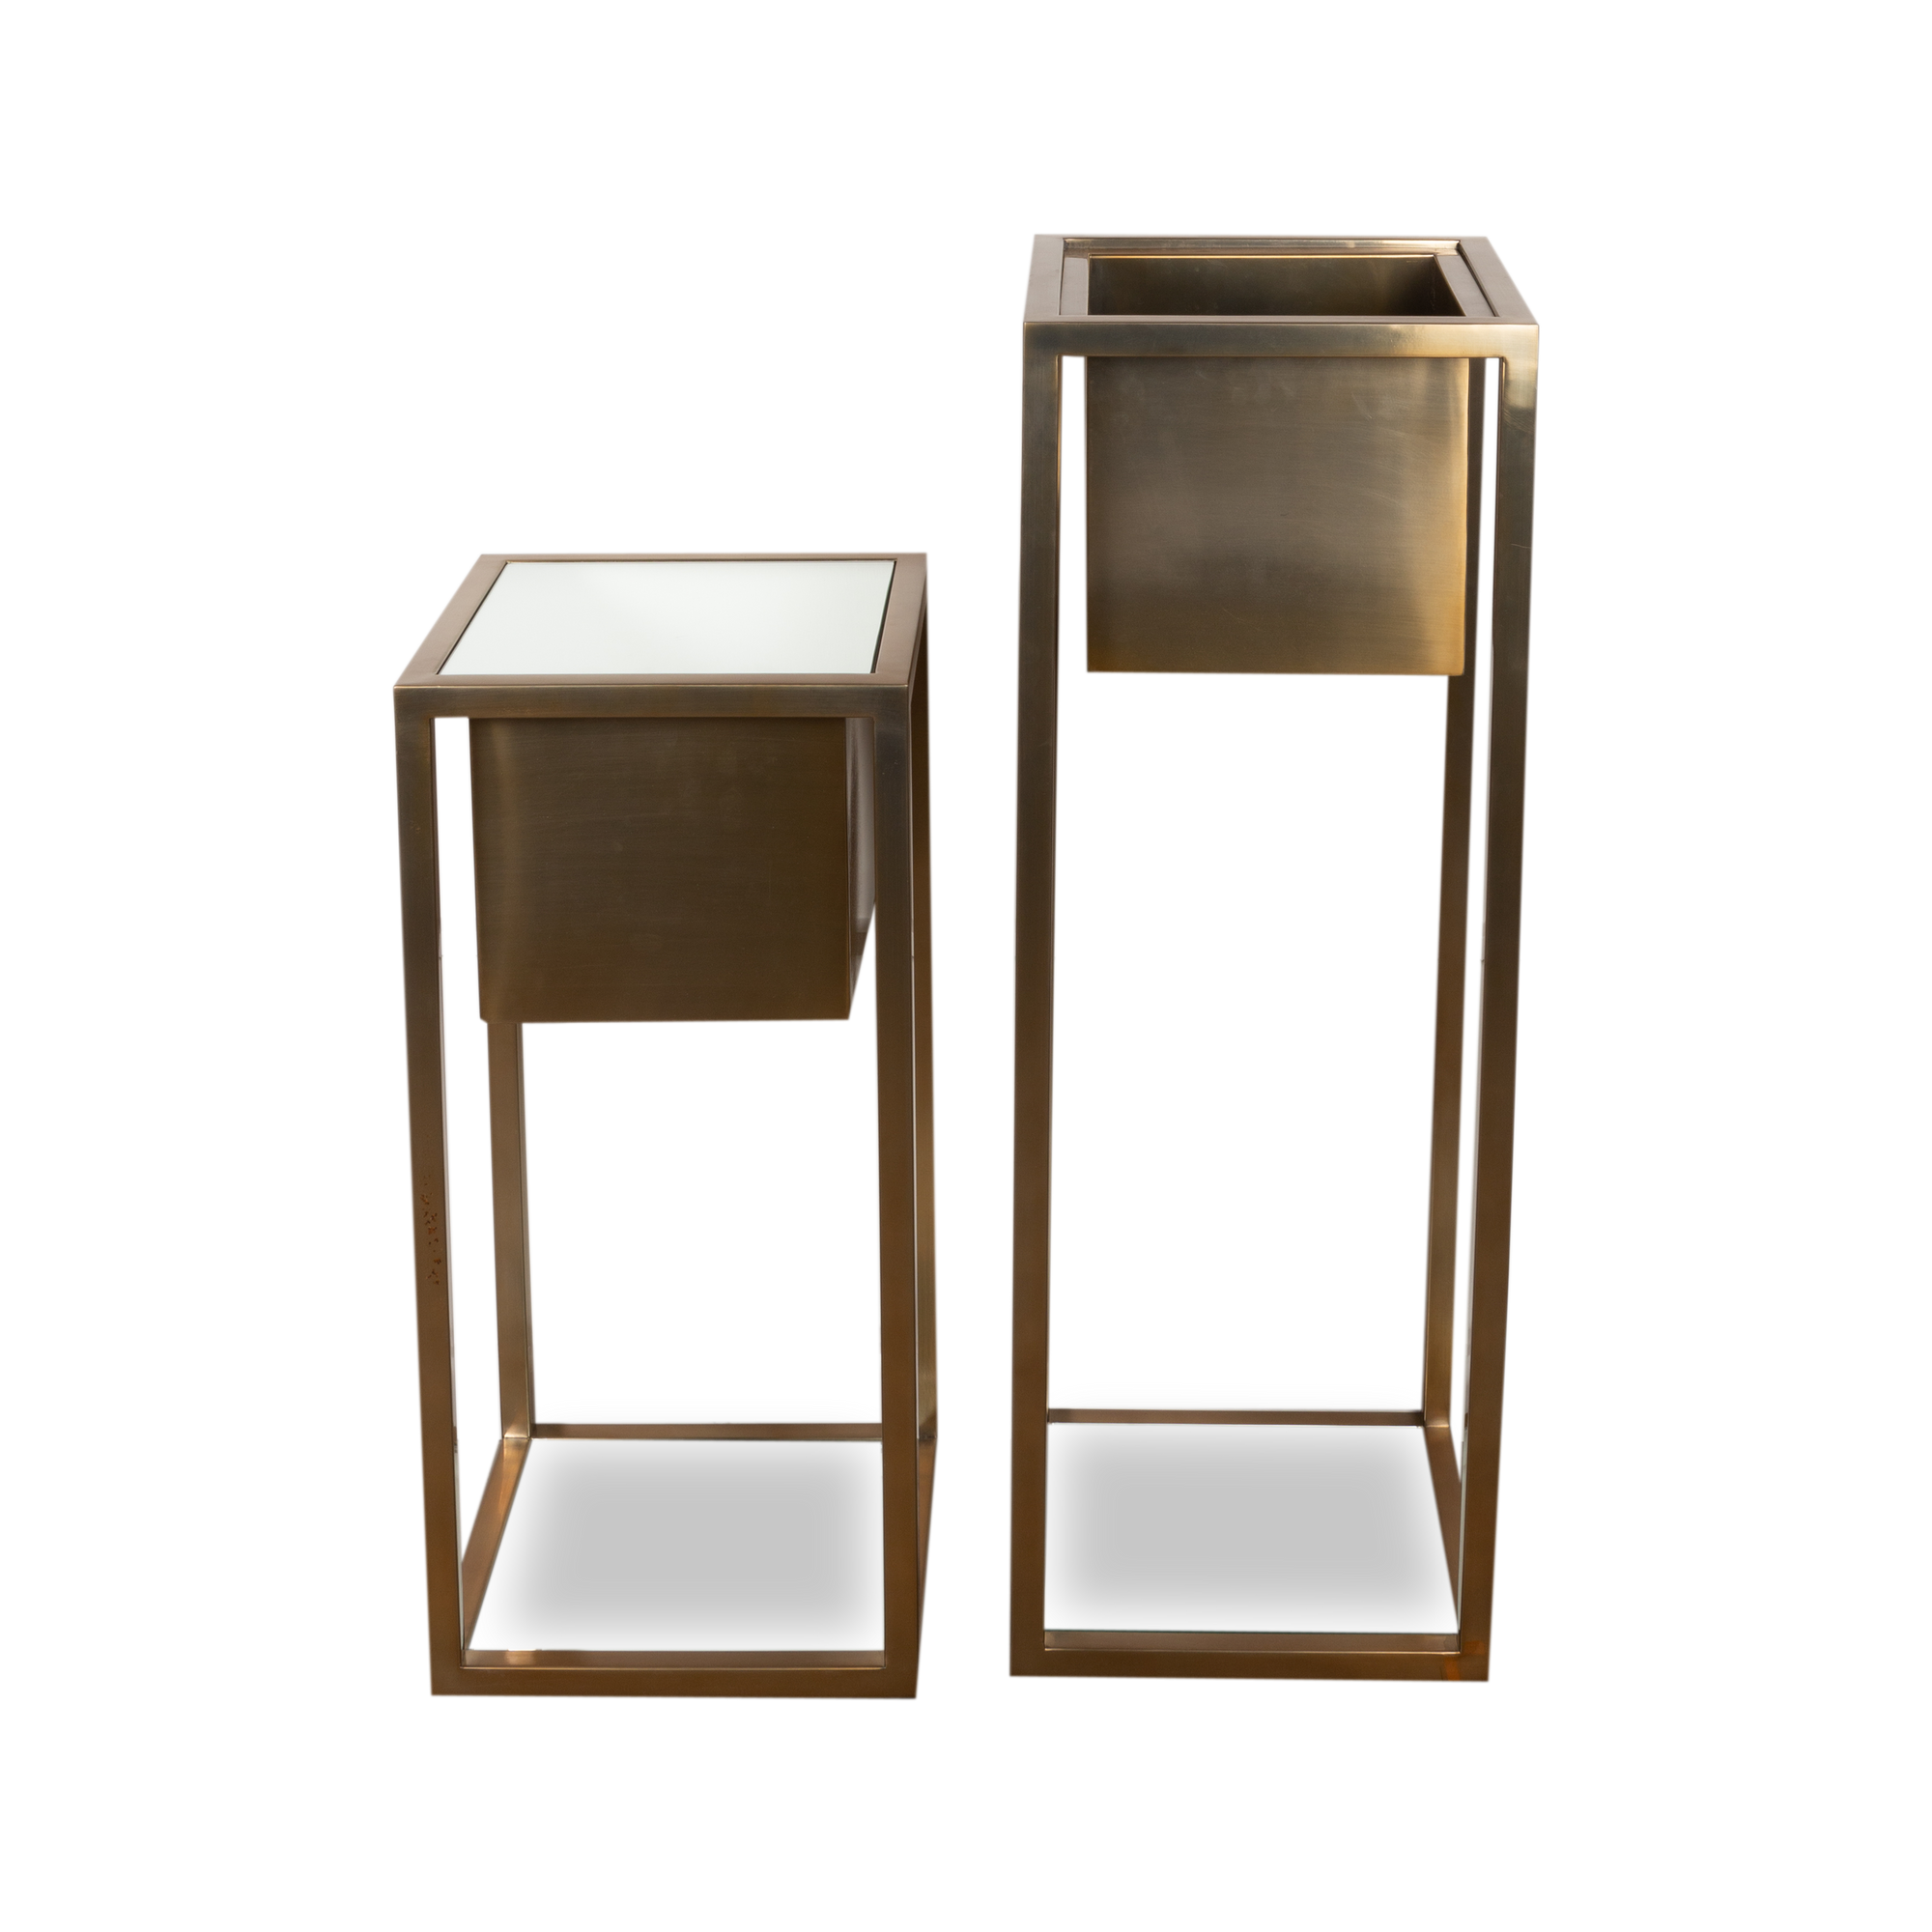 The Cuboid Brass Planter is made of a shiny brass finished steel frame with a glass mirrored bottom and optional mirrored top when used as an optional pedestal.